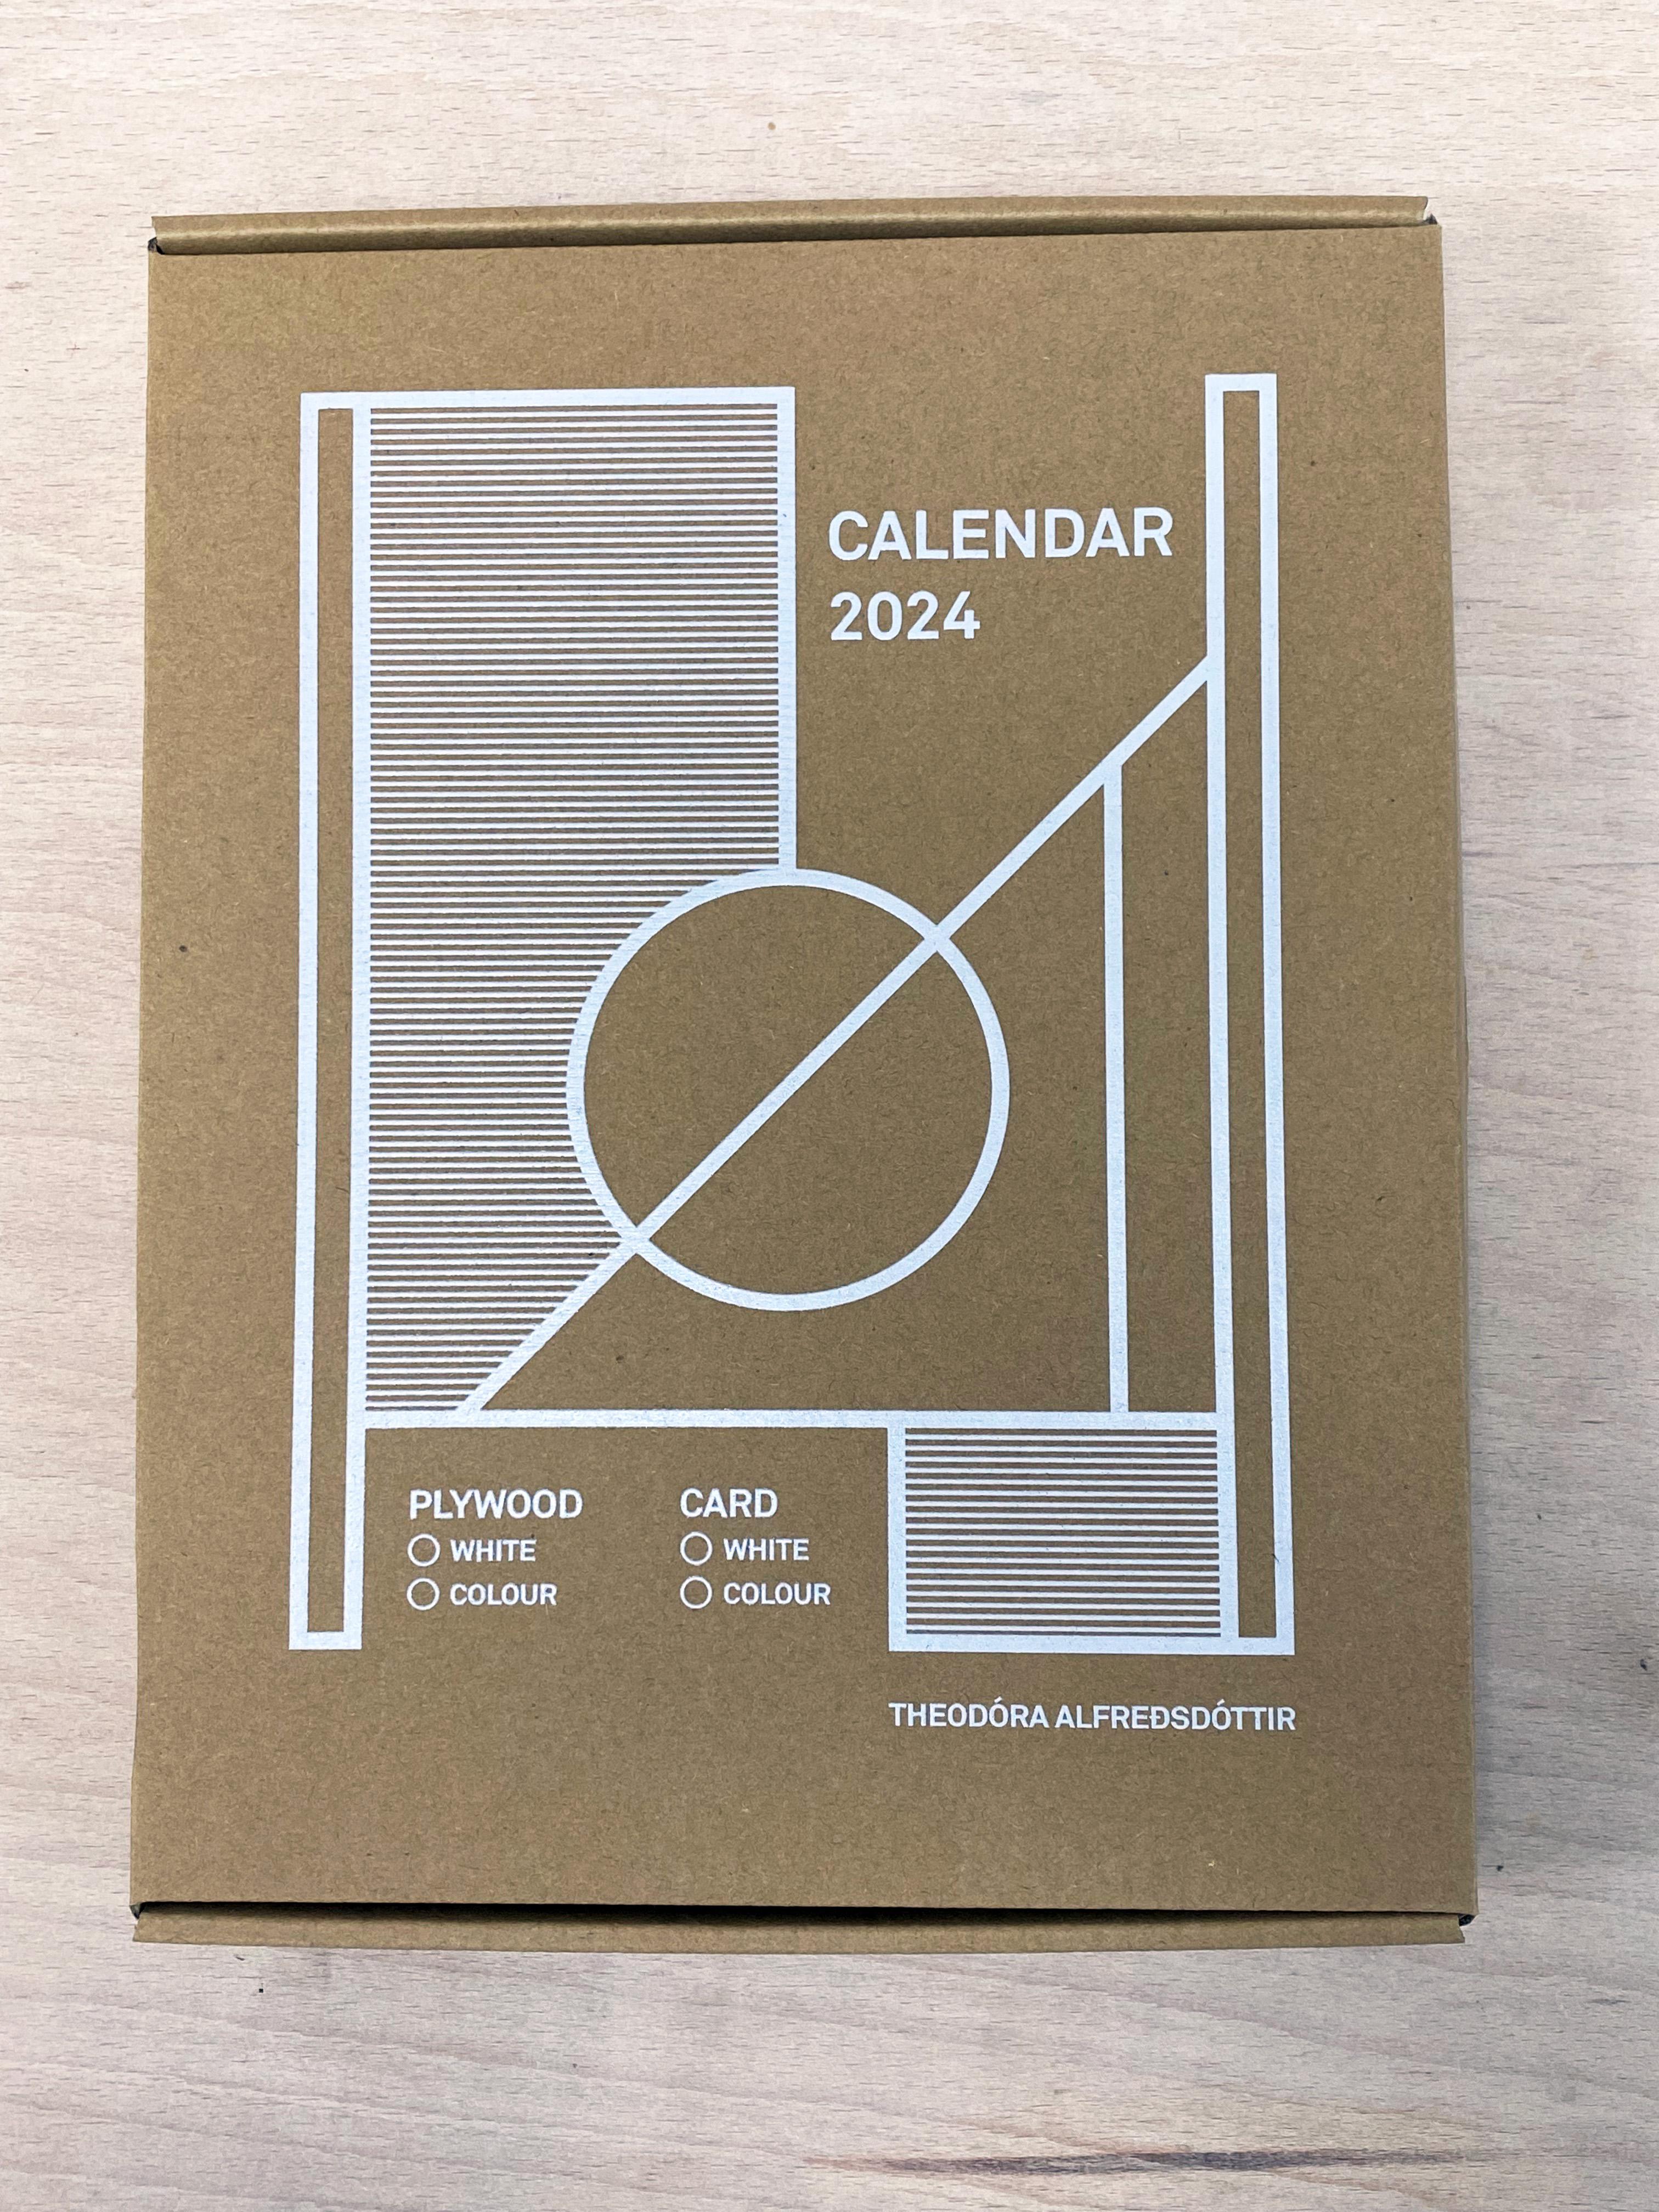 Calendar 2024 - White Plywood For Sale 3